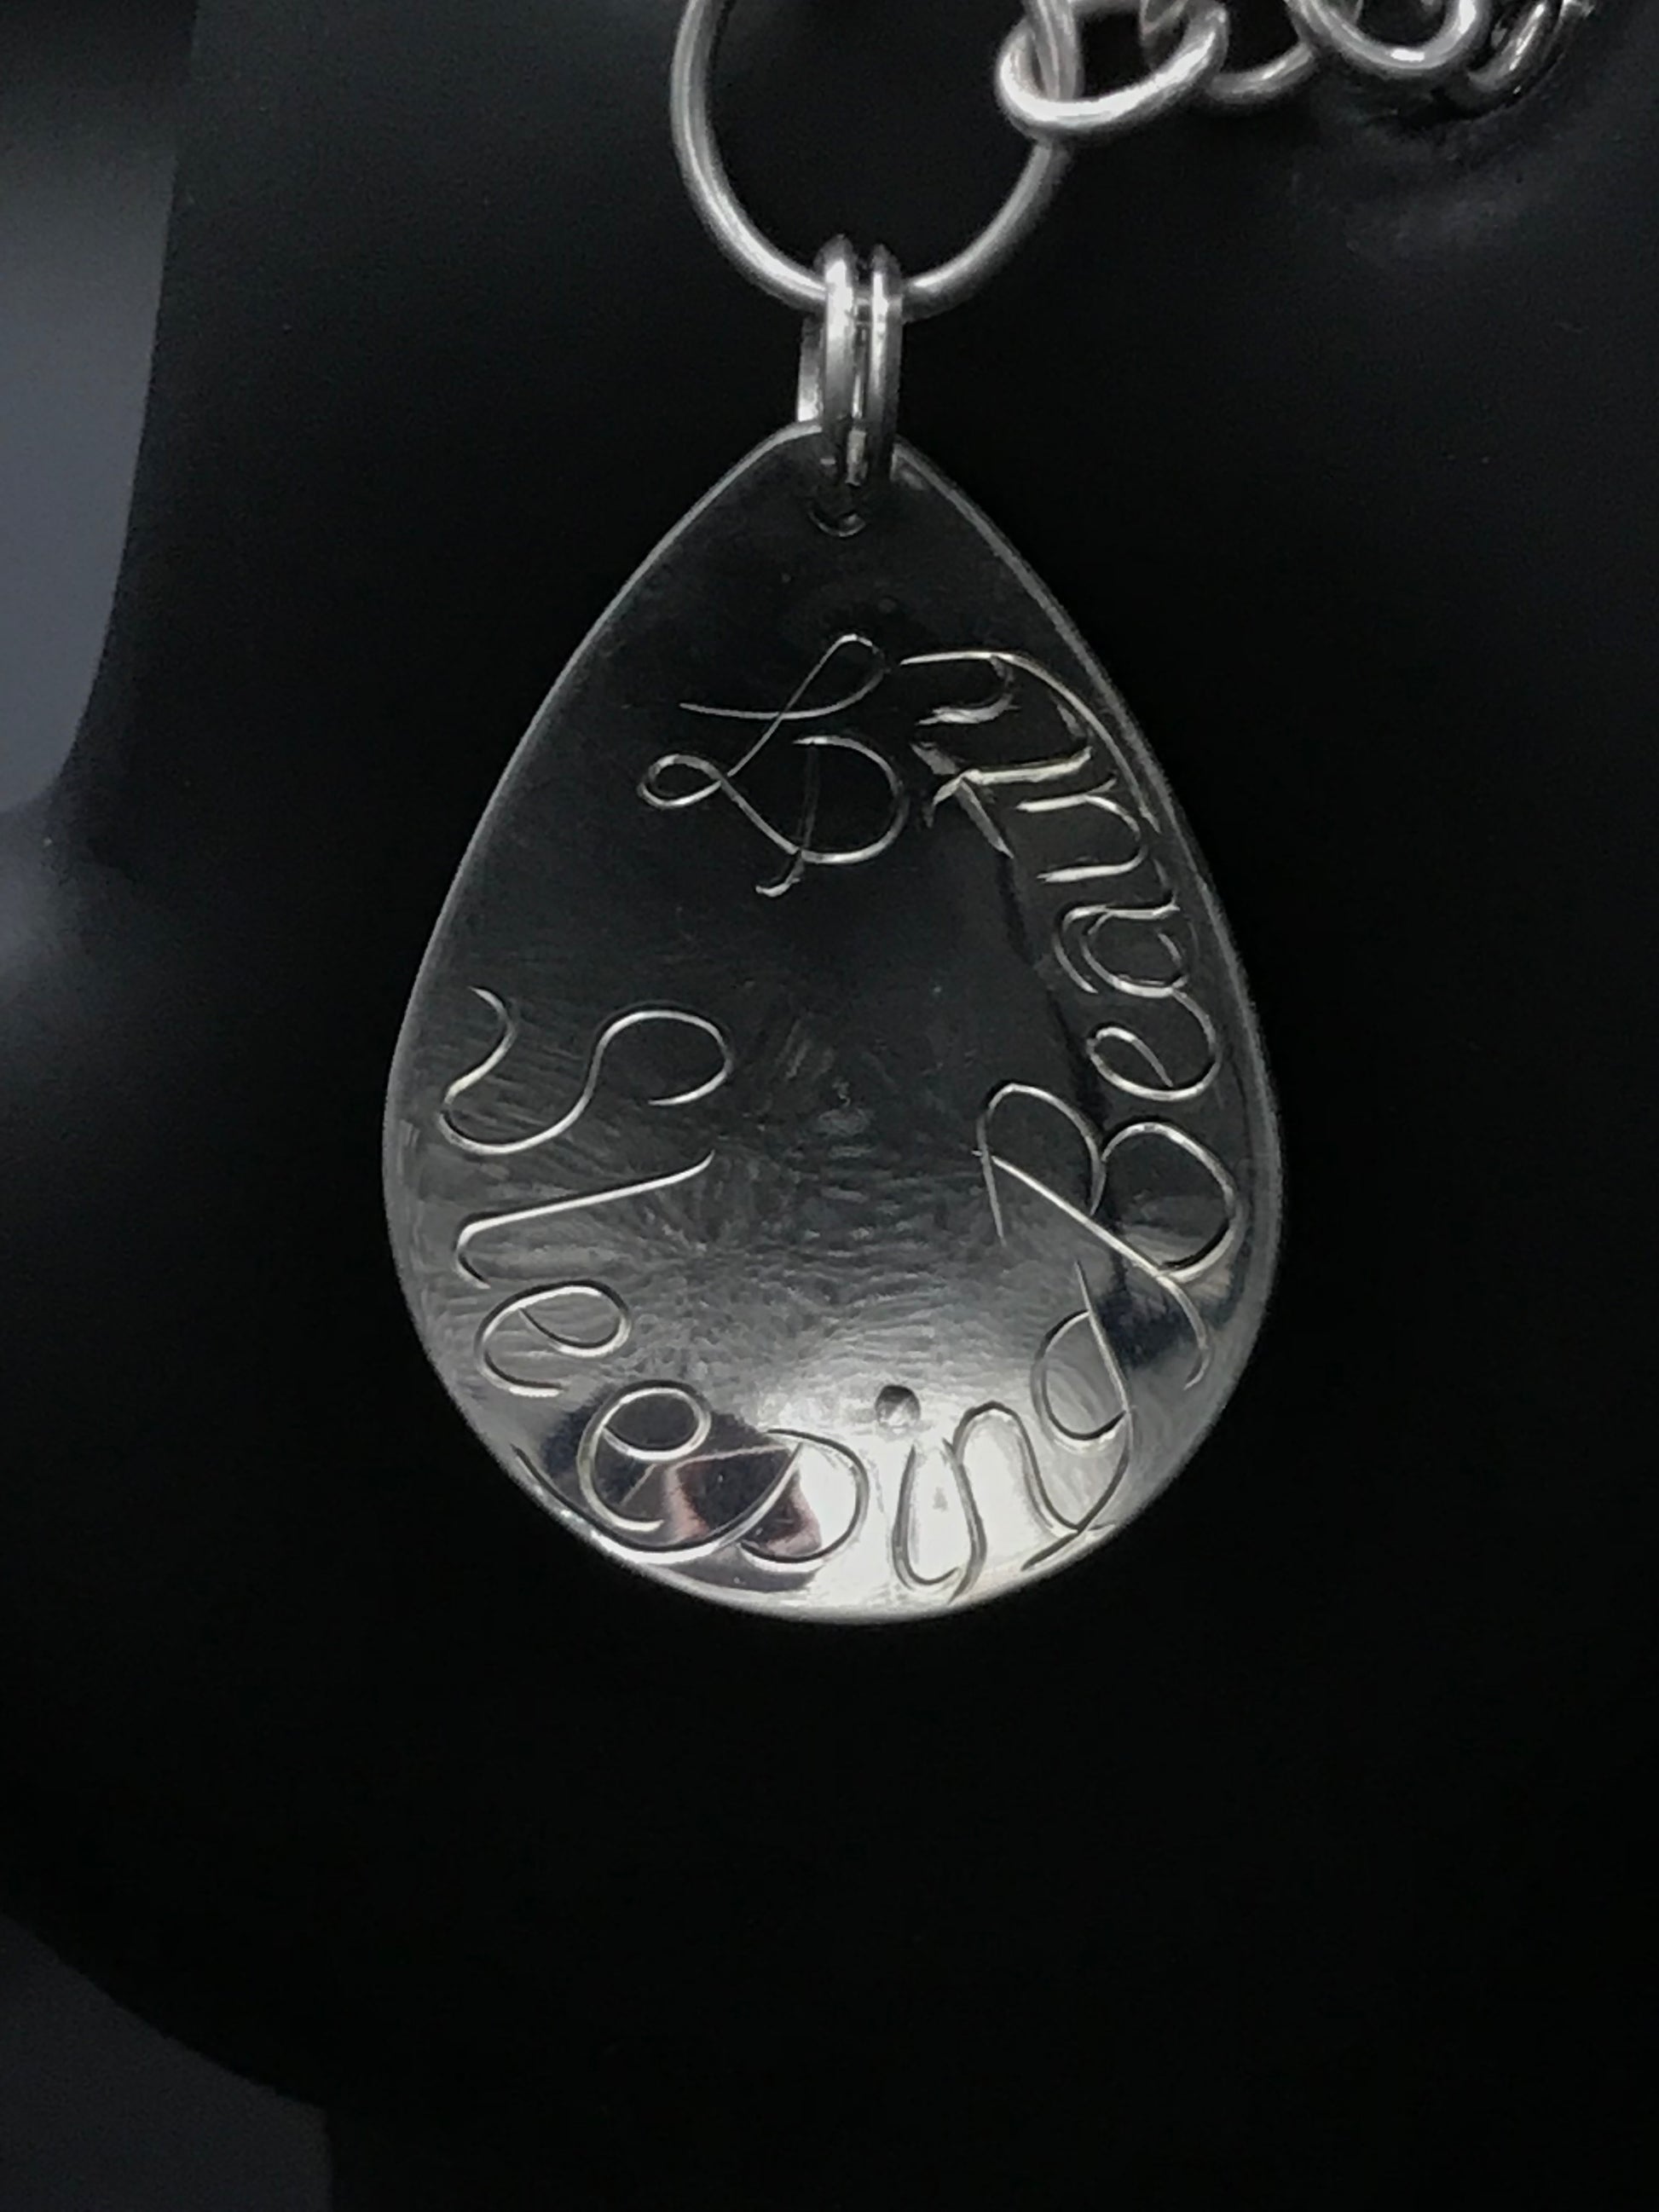 artist initials and sleeping beauty words engraved on back on charm